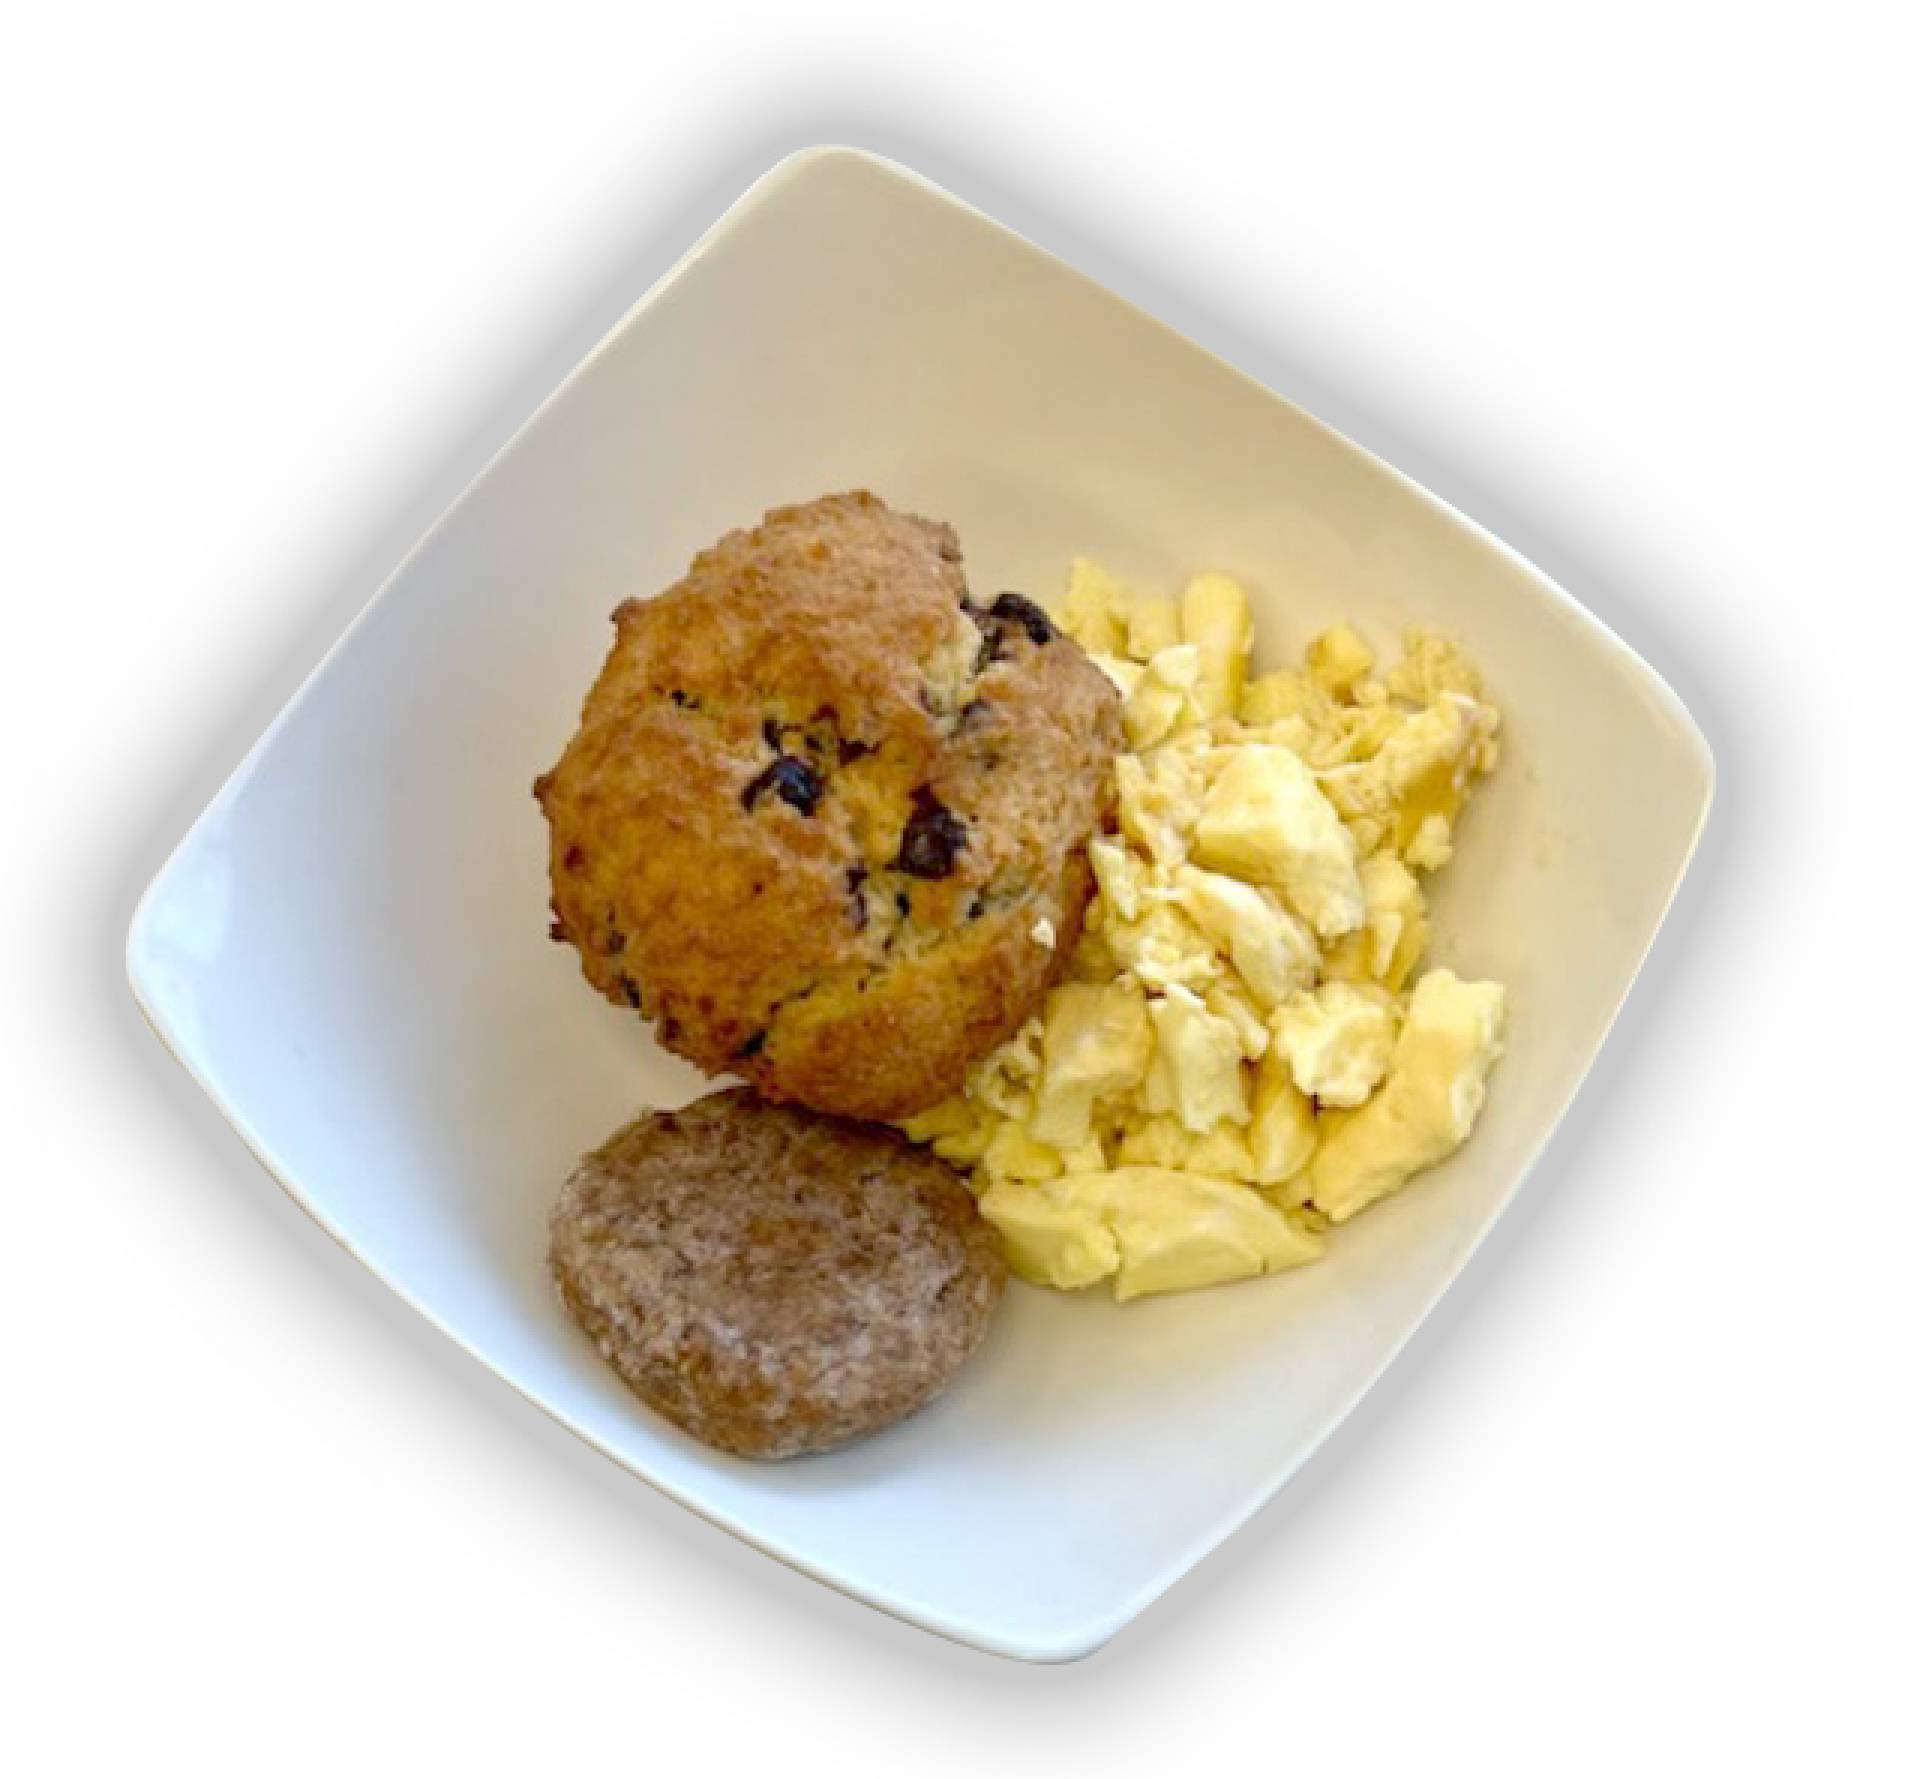 Chocolate Chip Muffins with Scrambled Eggs and Sausage Links